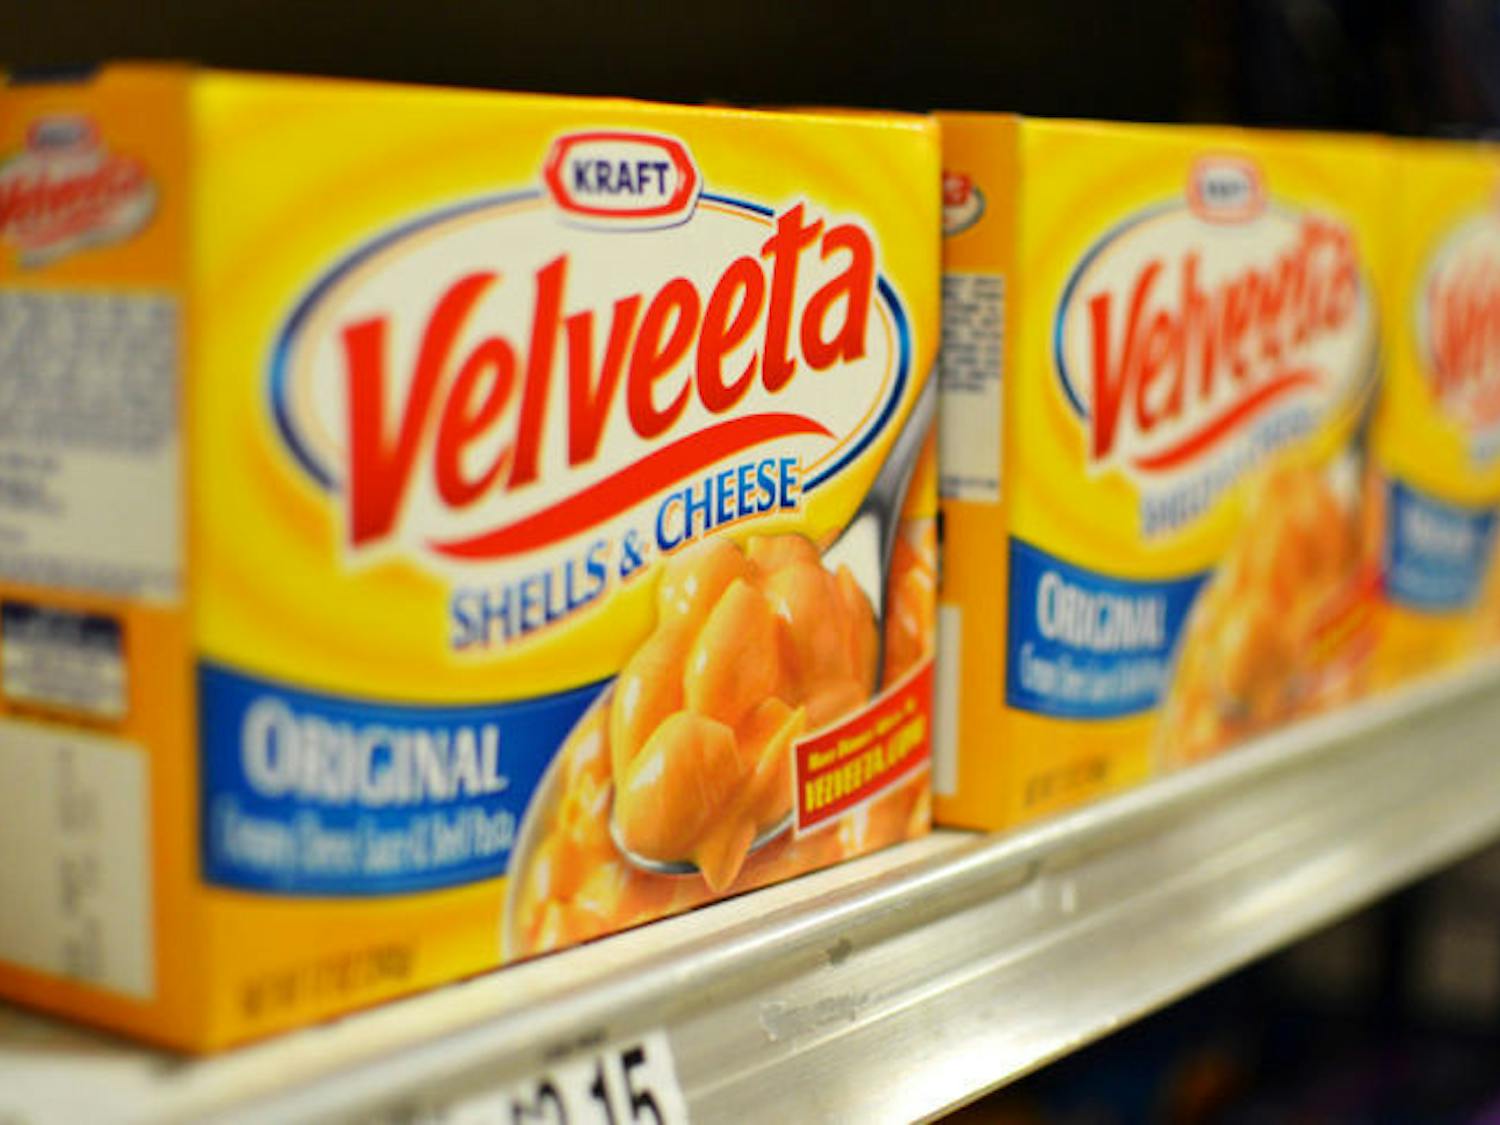 Velveeta macaroni and cheese boxes line Publix shelves on Archer Road Monday afternoon.Internet users dubbed a current shortage of Velveeta cheese products a #cheesepocalypse.&nbsp;